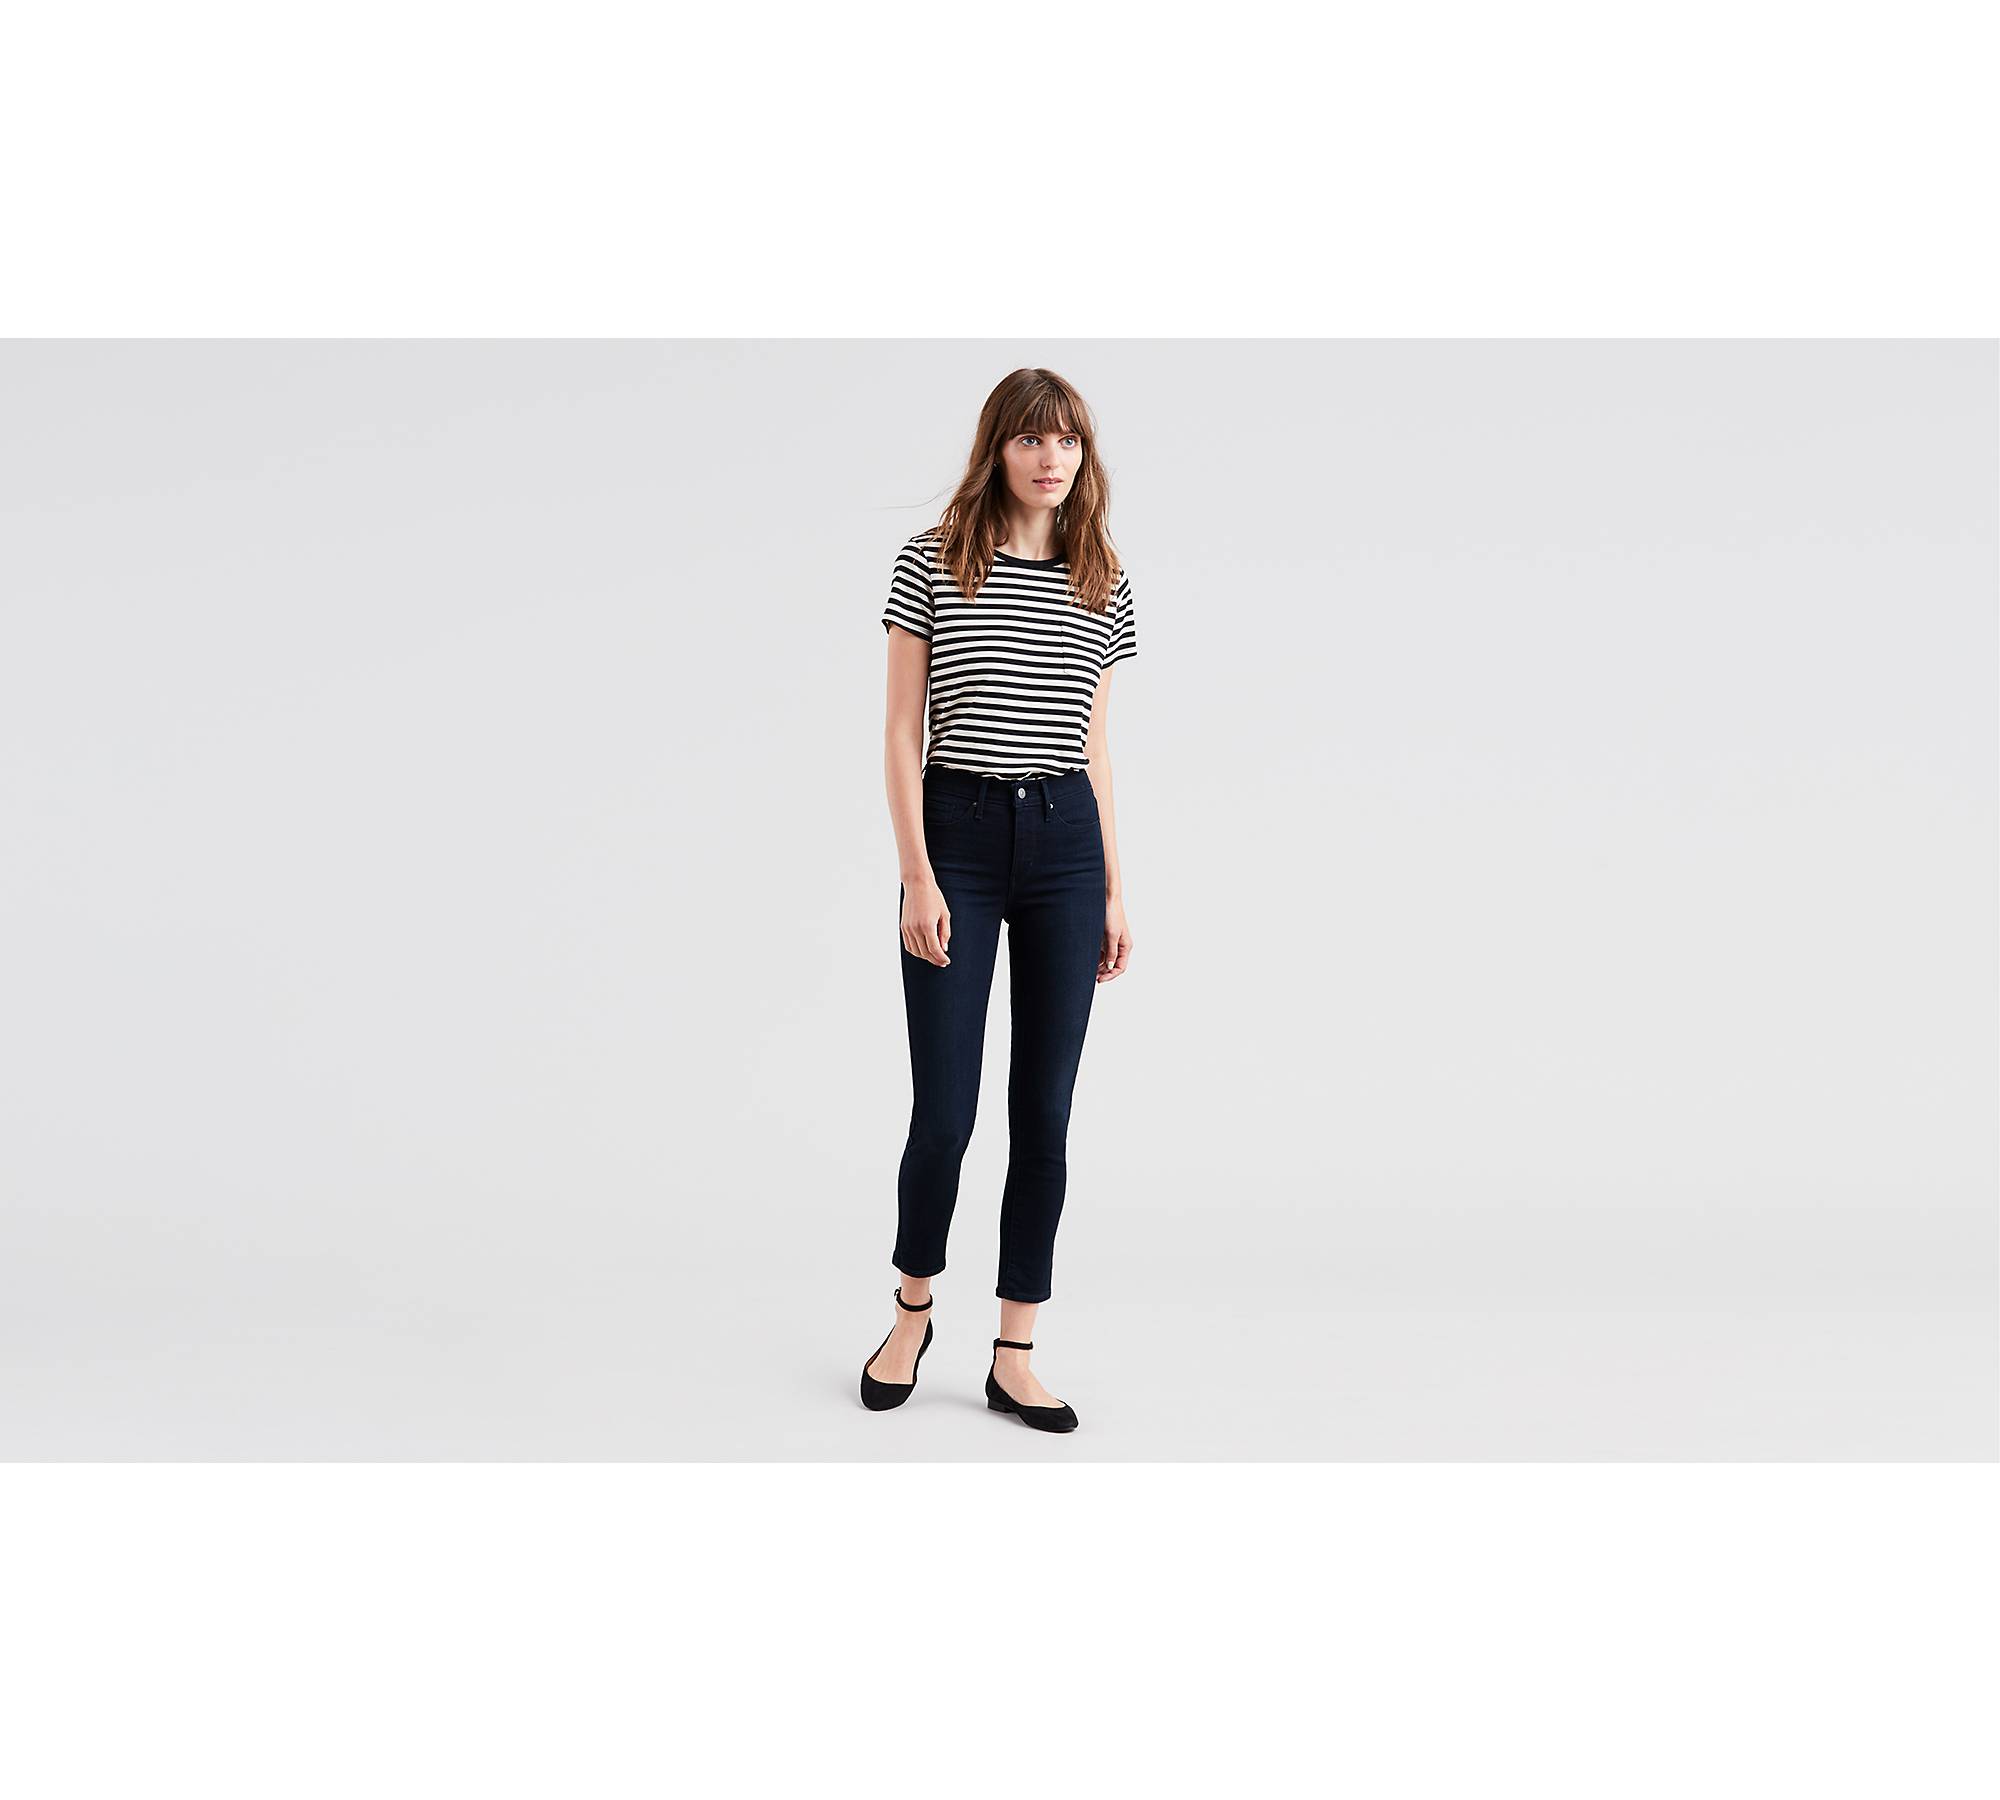 311 Shaping Skinny Ankle Women's Jeans - Dark Wash | Levi's® US